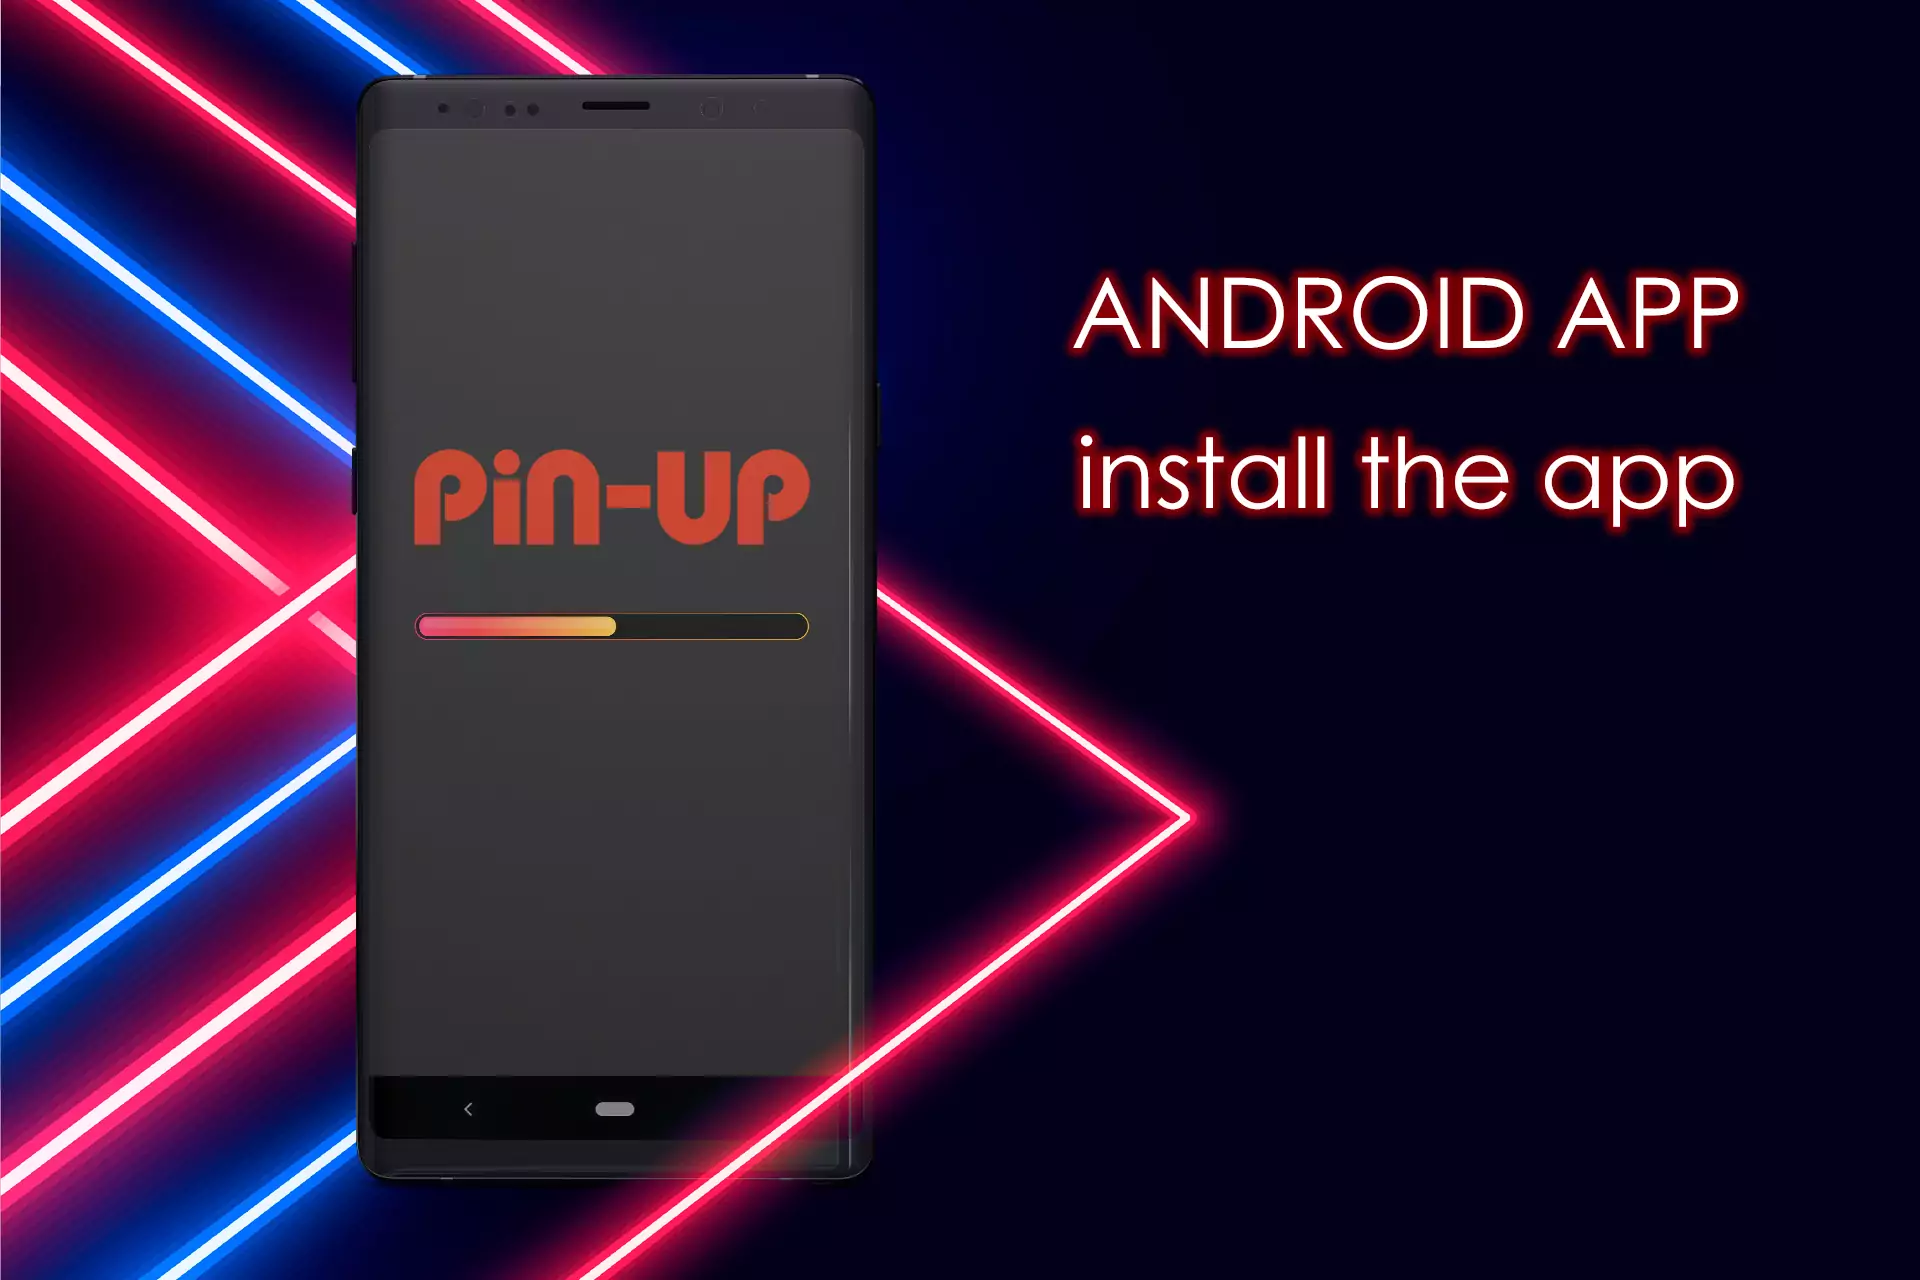 Run the apk file and install the application on your device.